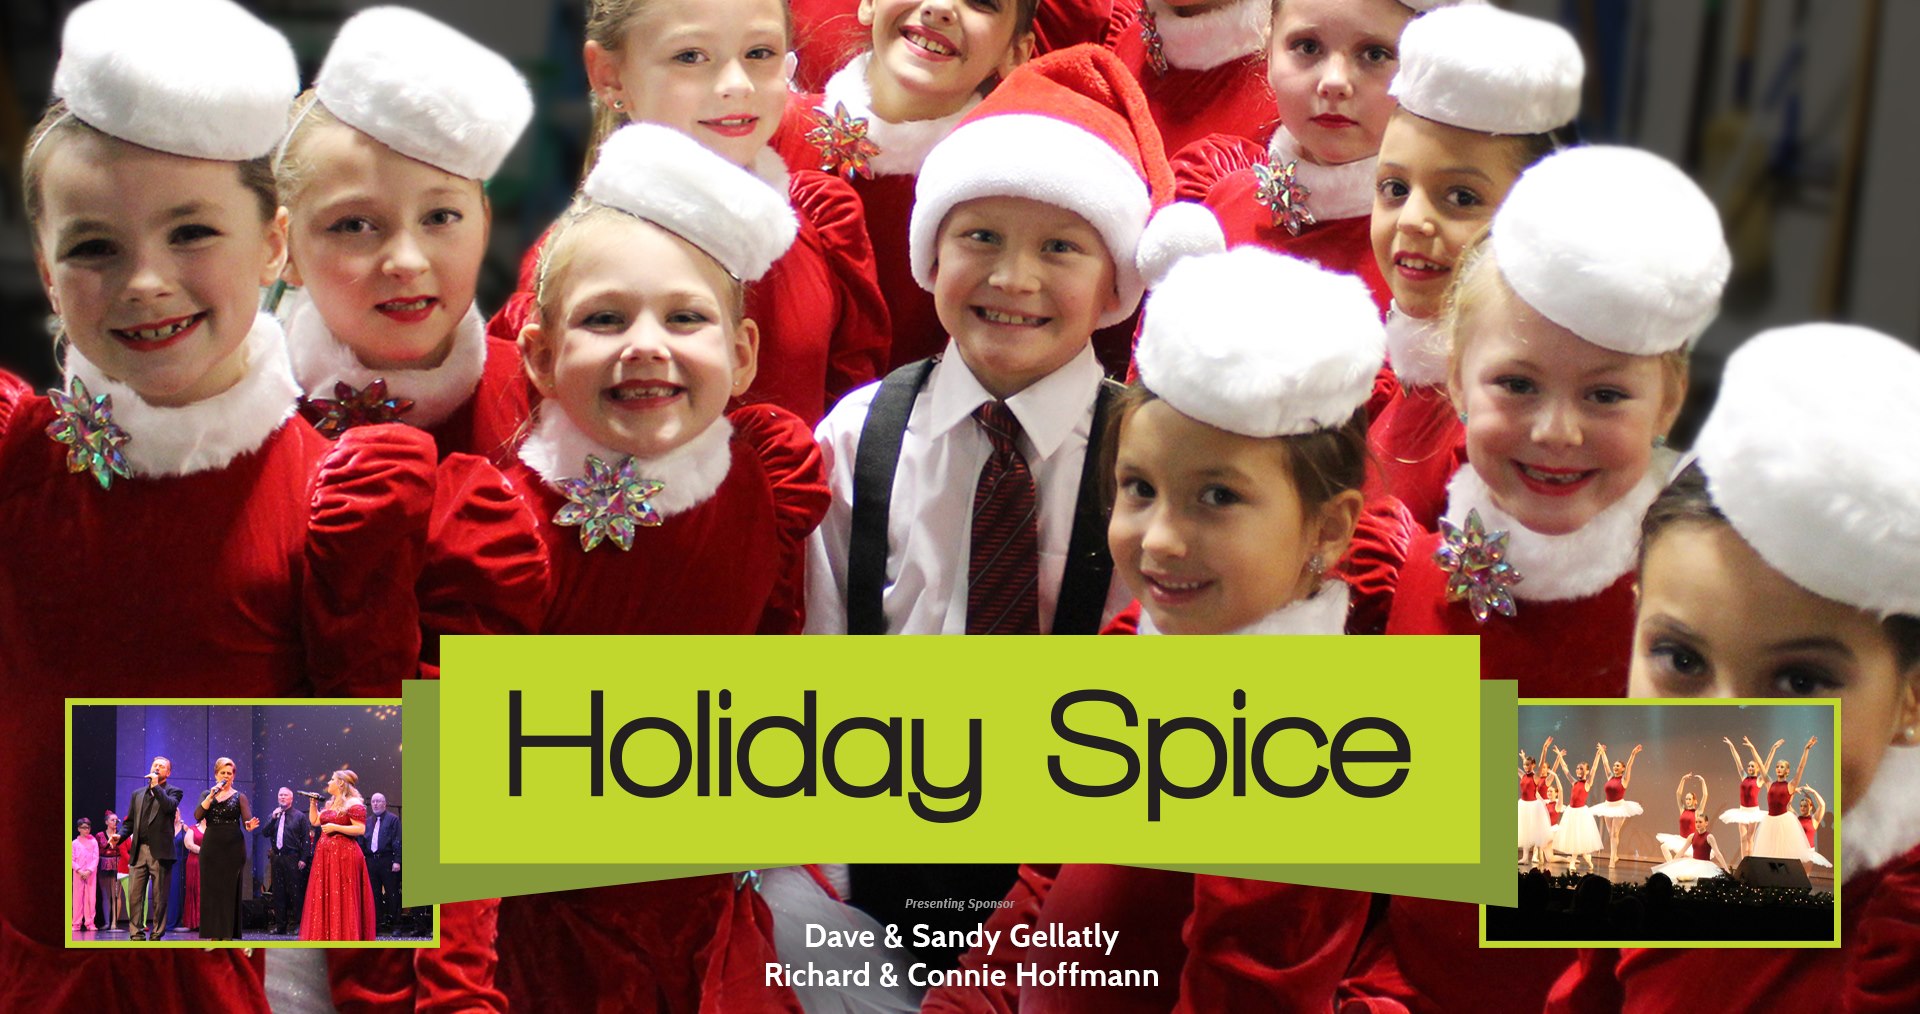 <h1 class="tribe-events-single-event-title">Holiday Spice</h1>